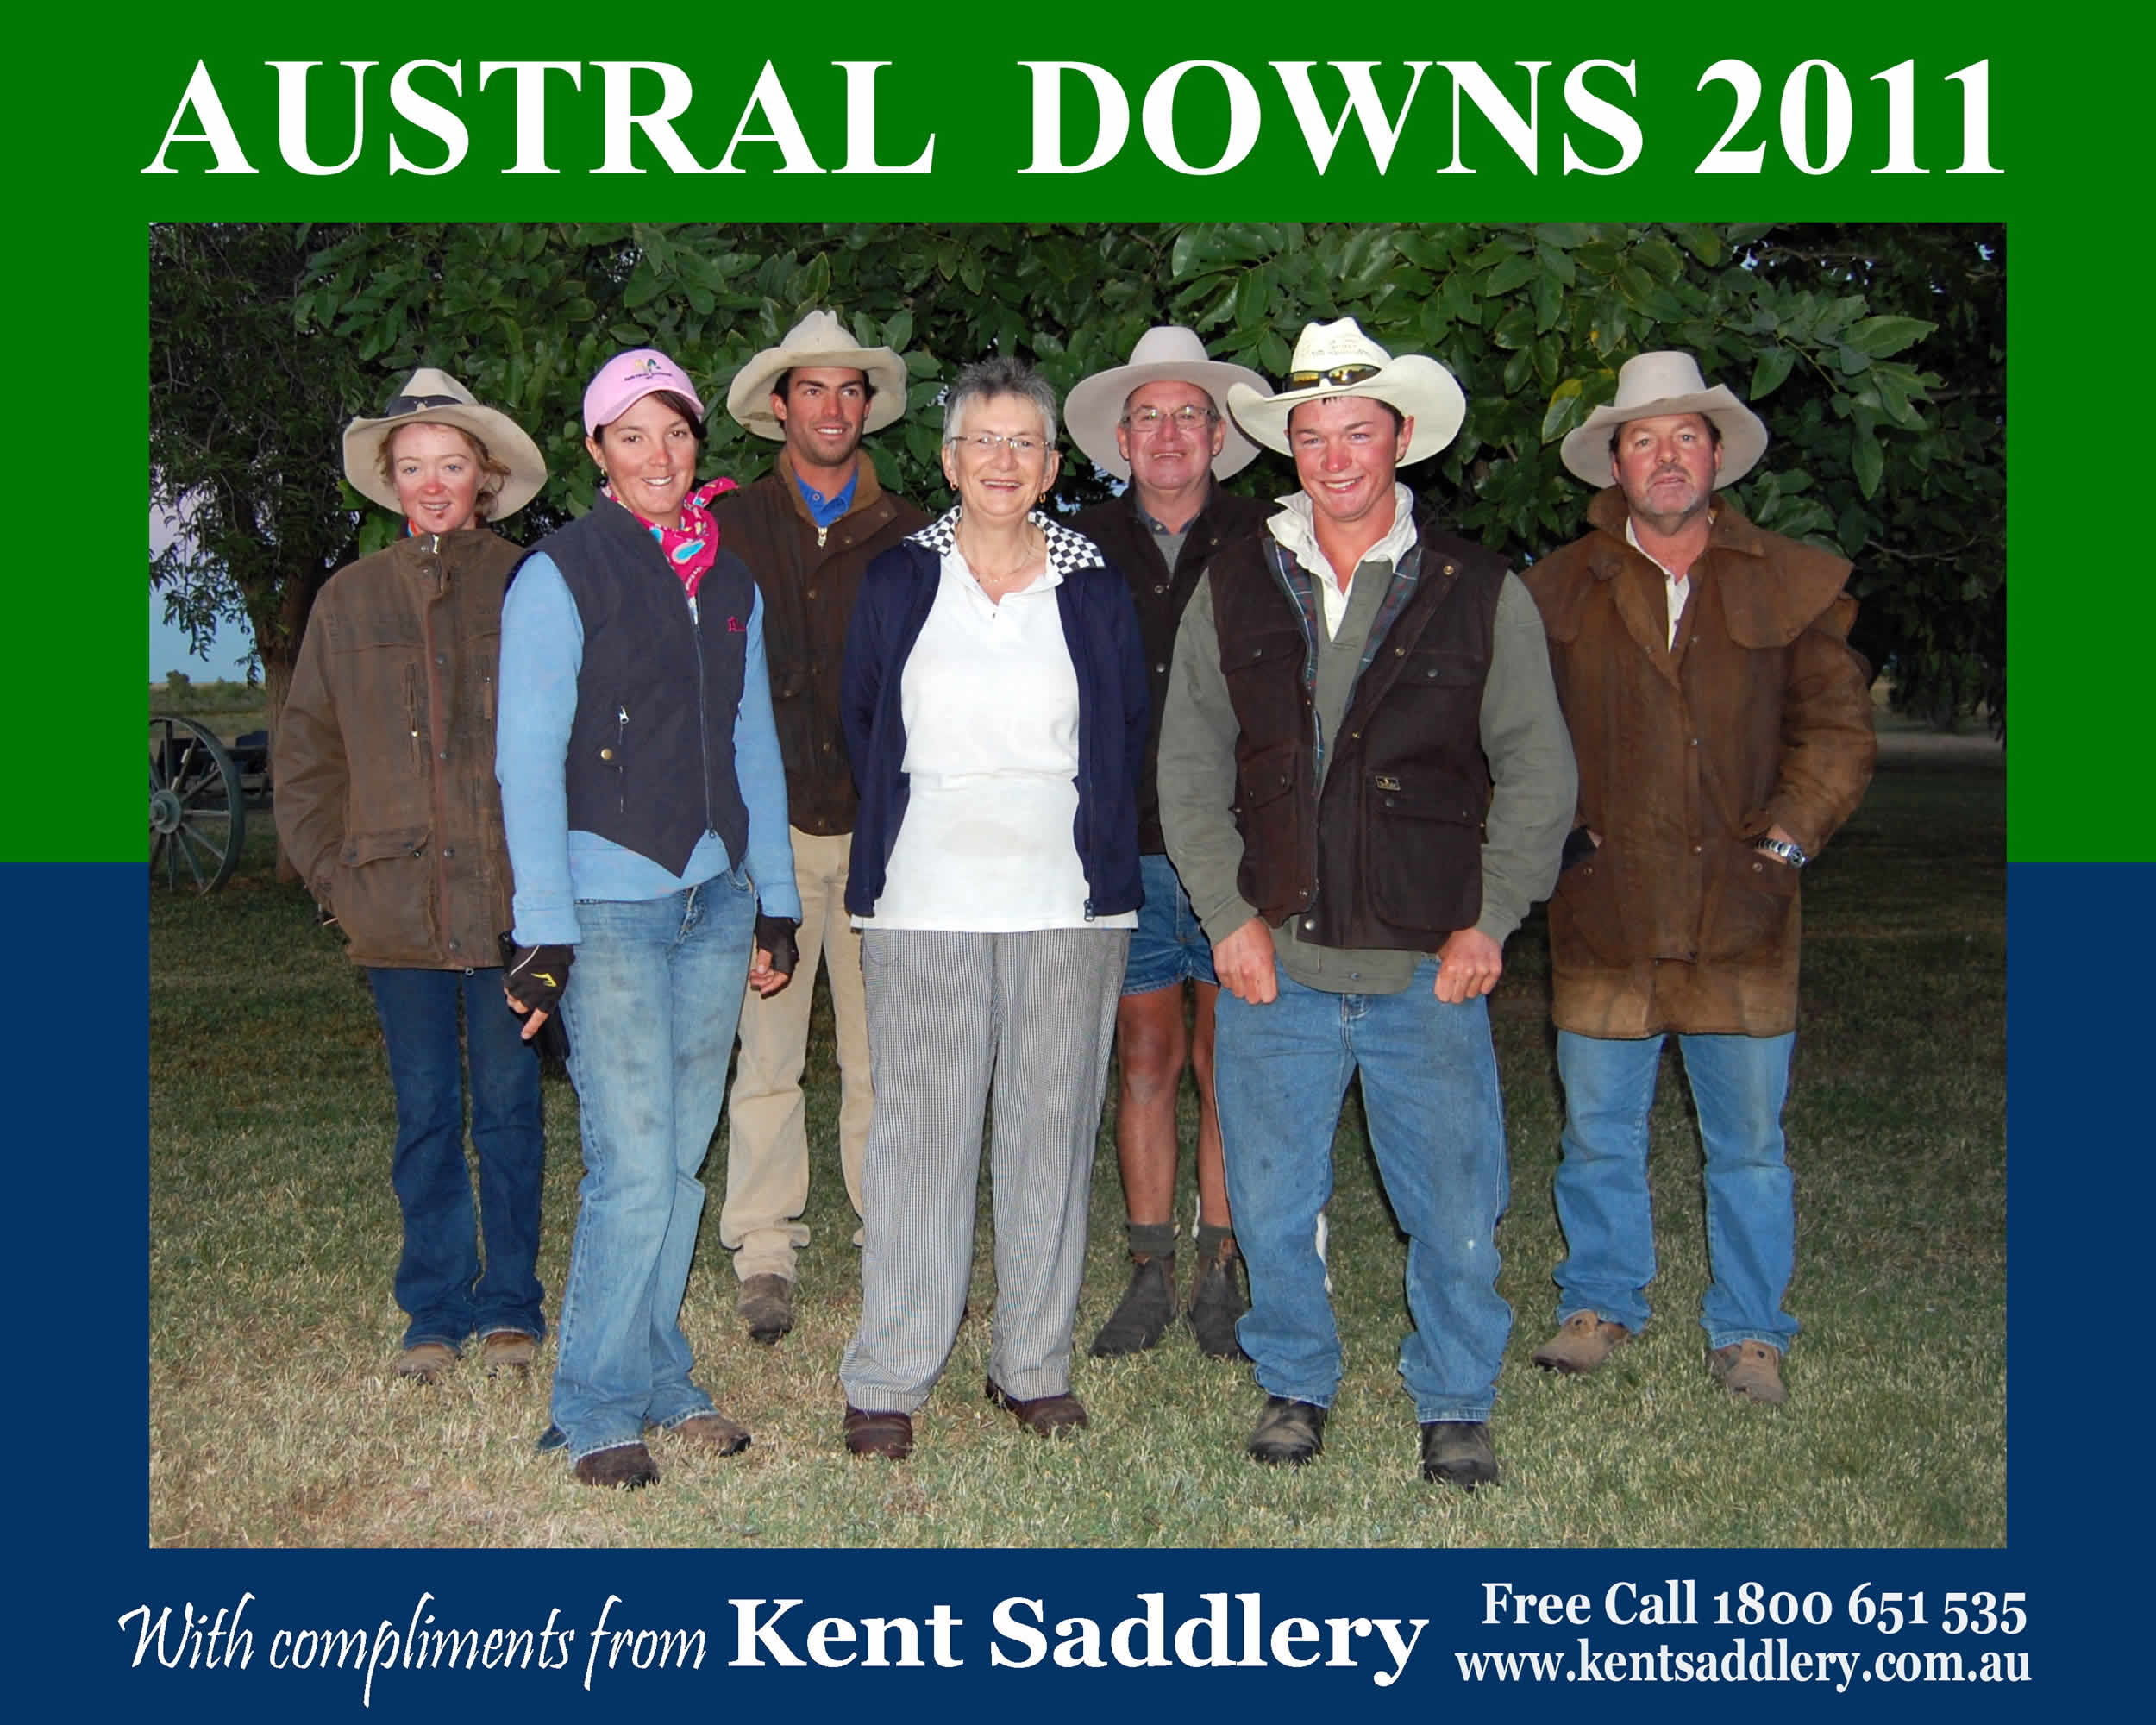 Northern Territory - Austral Downs 12